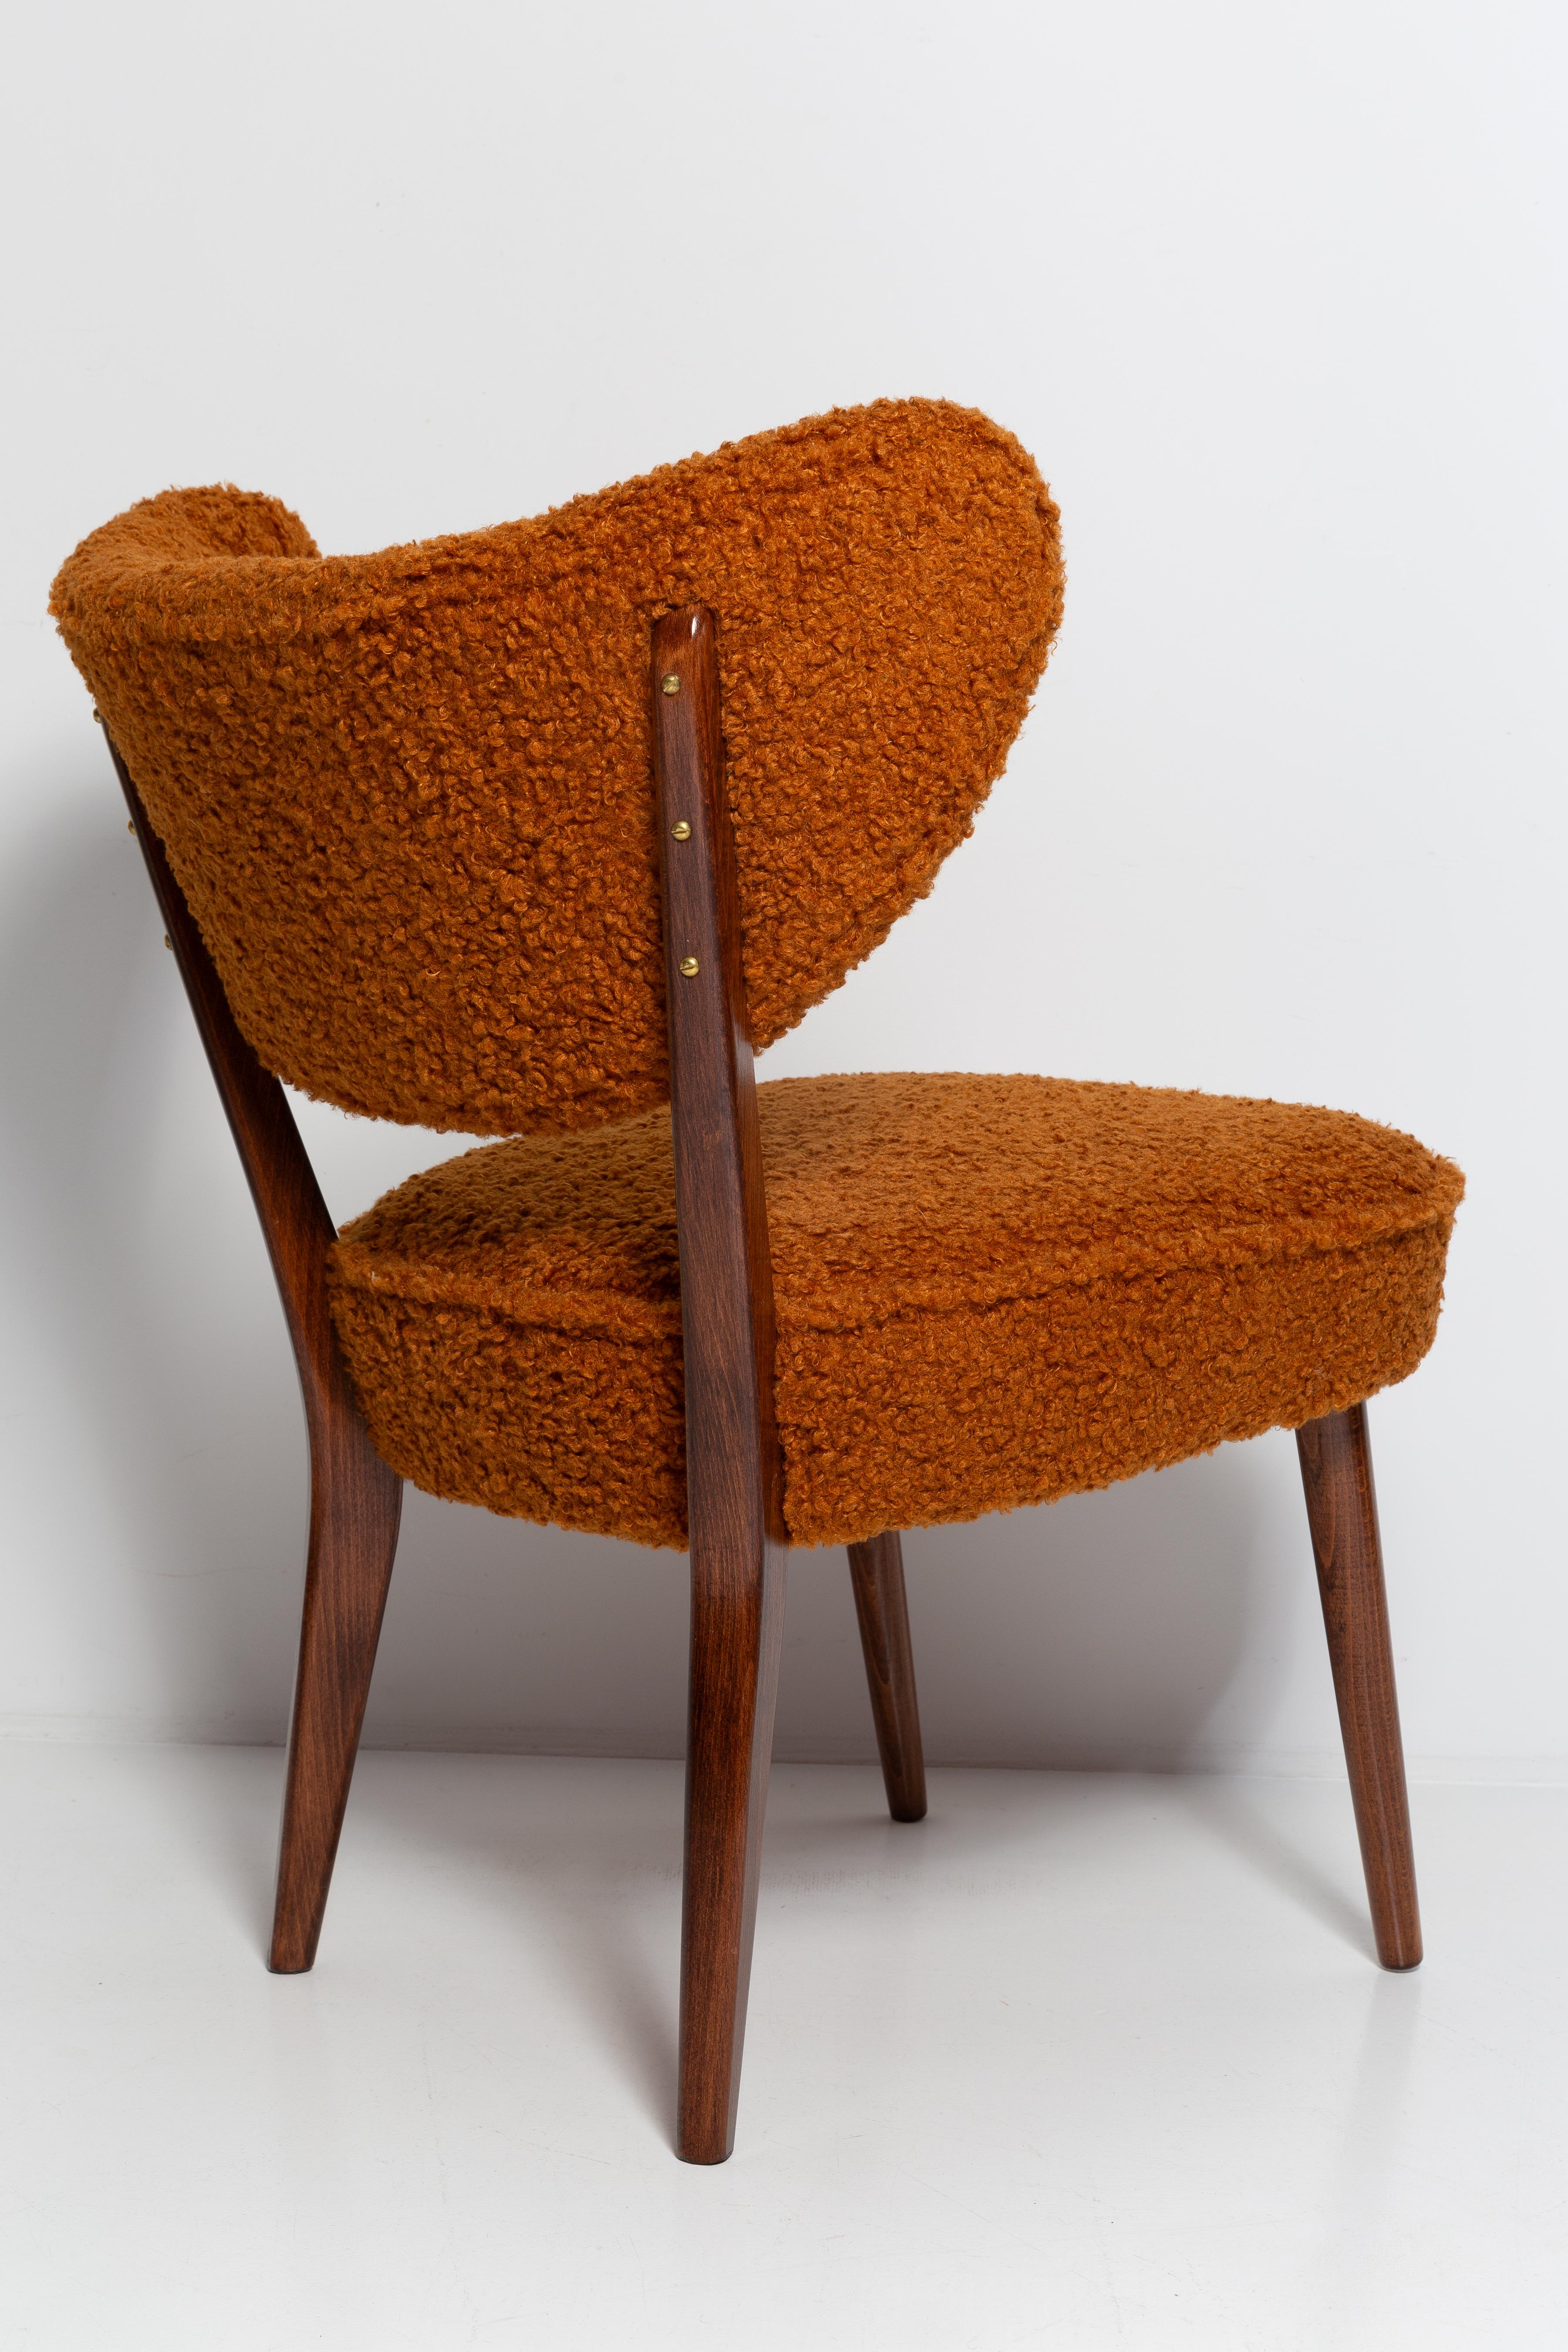 Hand-Crafted Pair of Orange Boucle Shell Club Chairs, by Vintola Studio, Europe, Poland For Sale